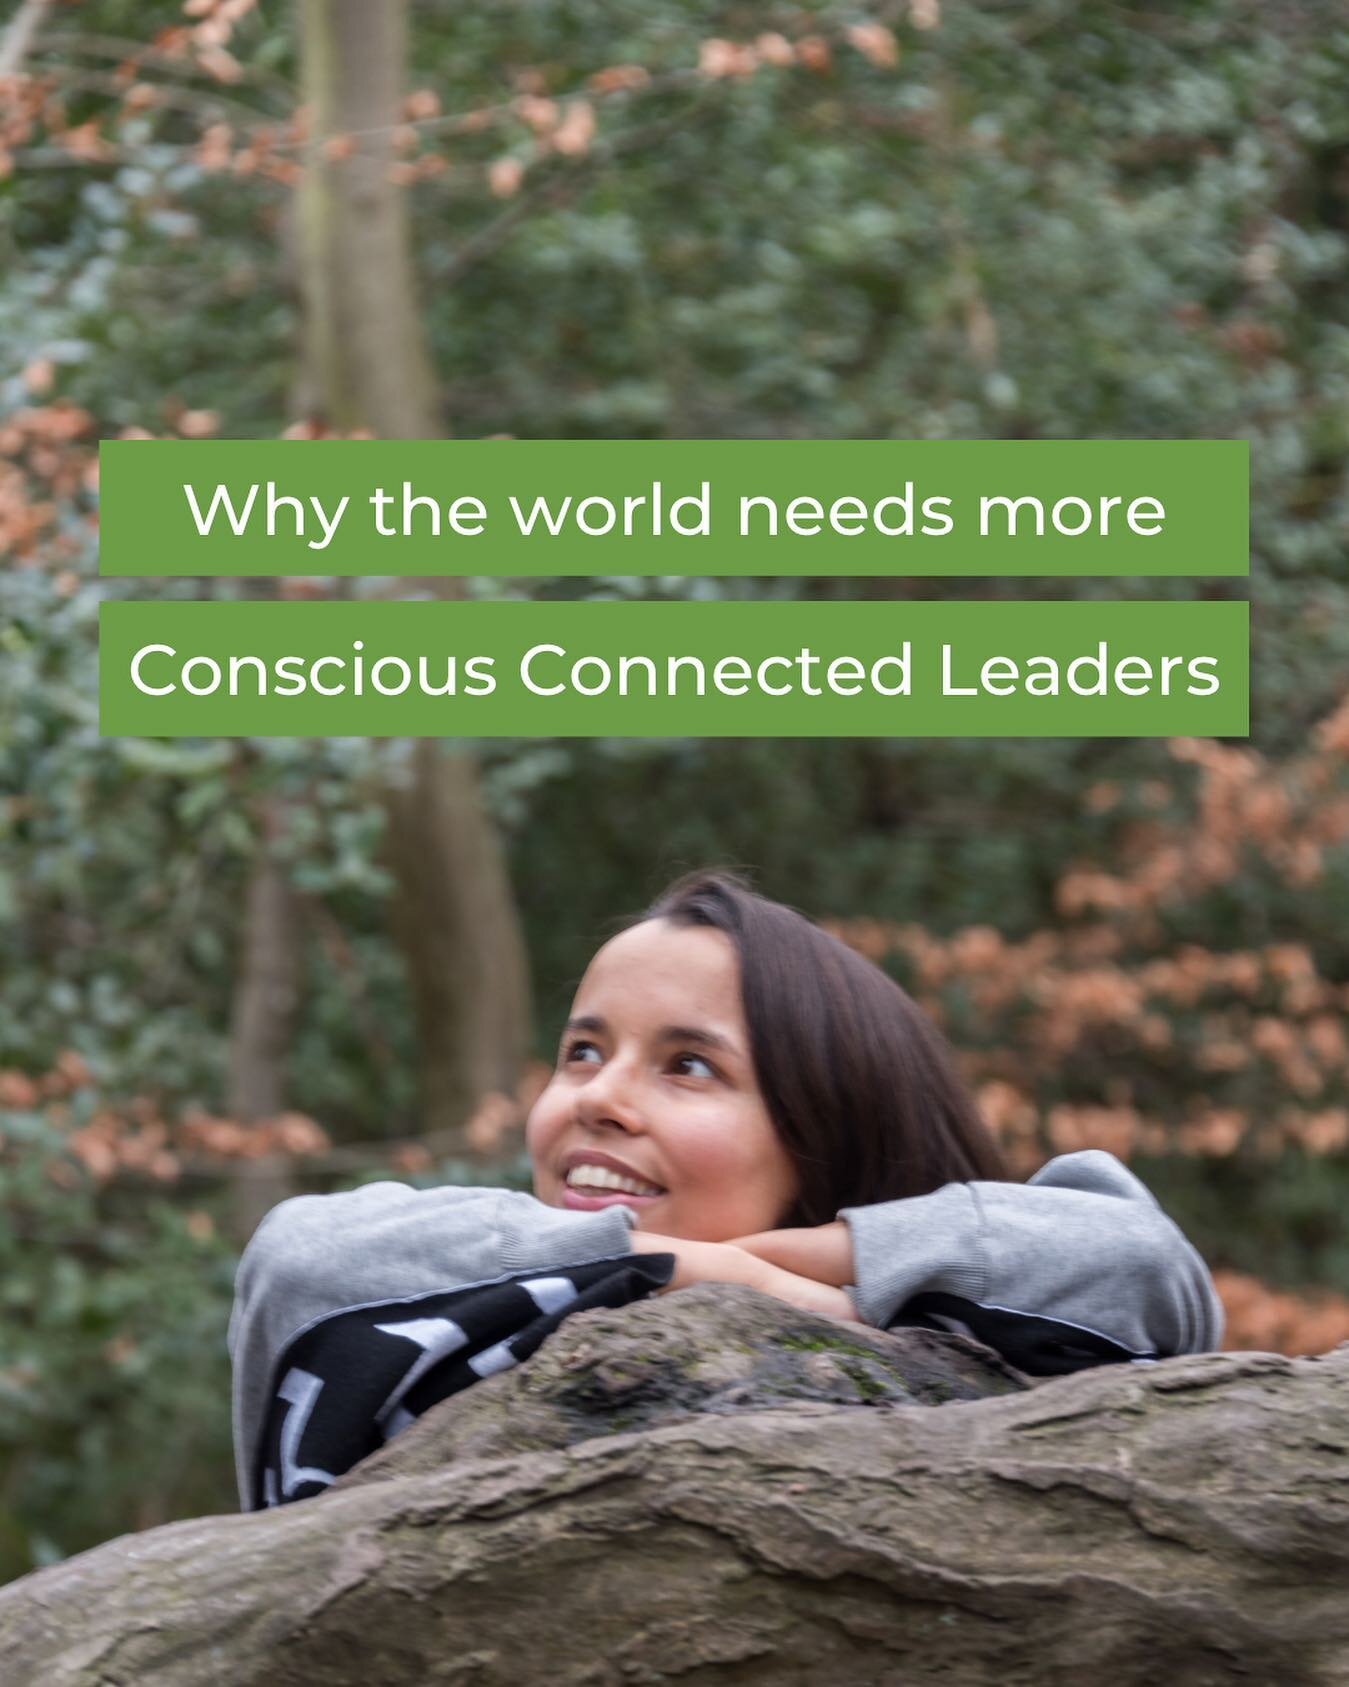 Why the world needs more Conscious Connected Leaders 🌎

We're experiencing a time where the world has never seemed more turbulent, disconnected and individualistic.

As humans, our disconnect goes against our very essence as souls who need love and 